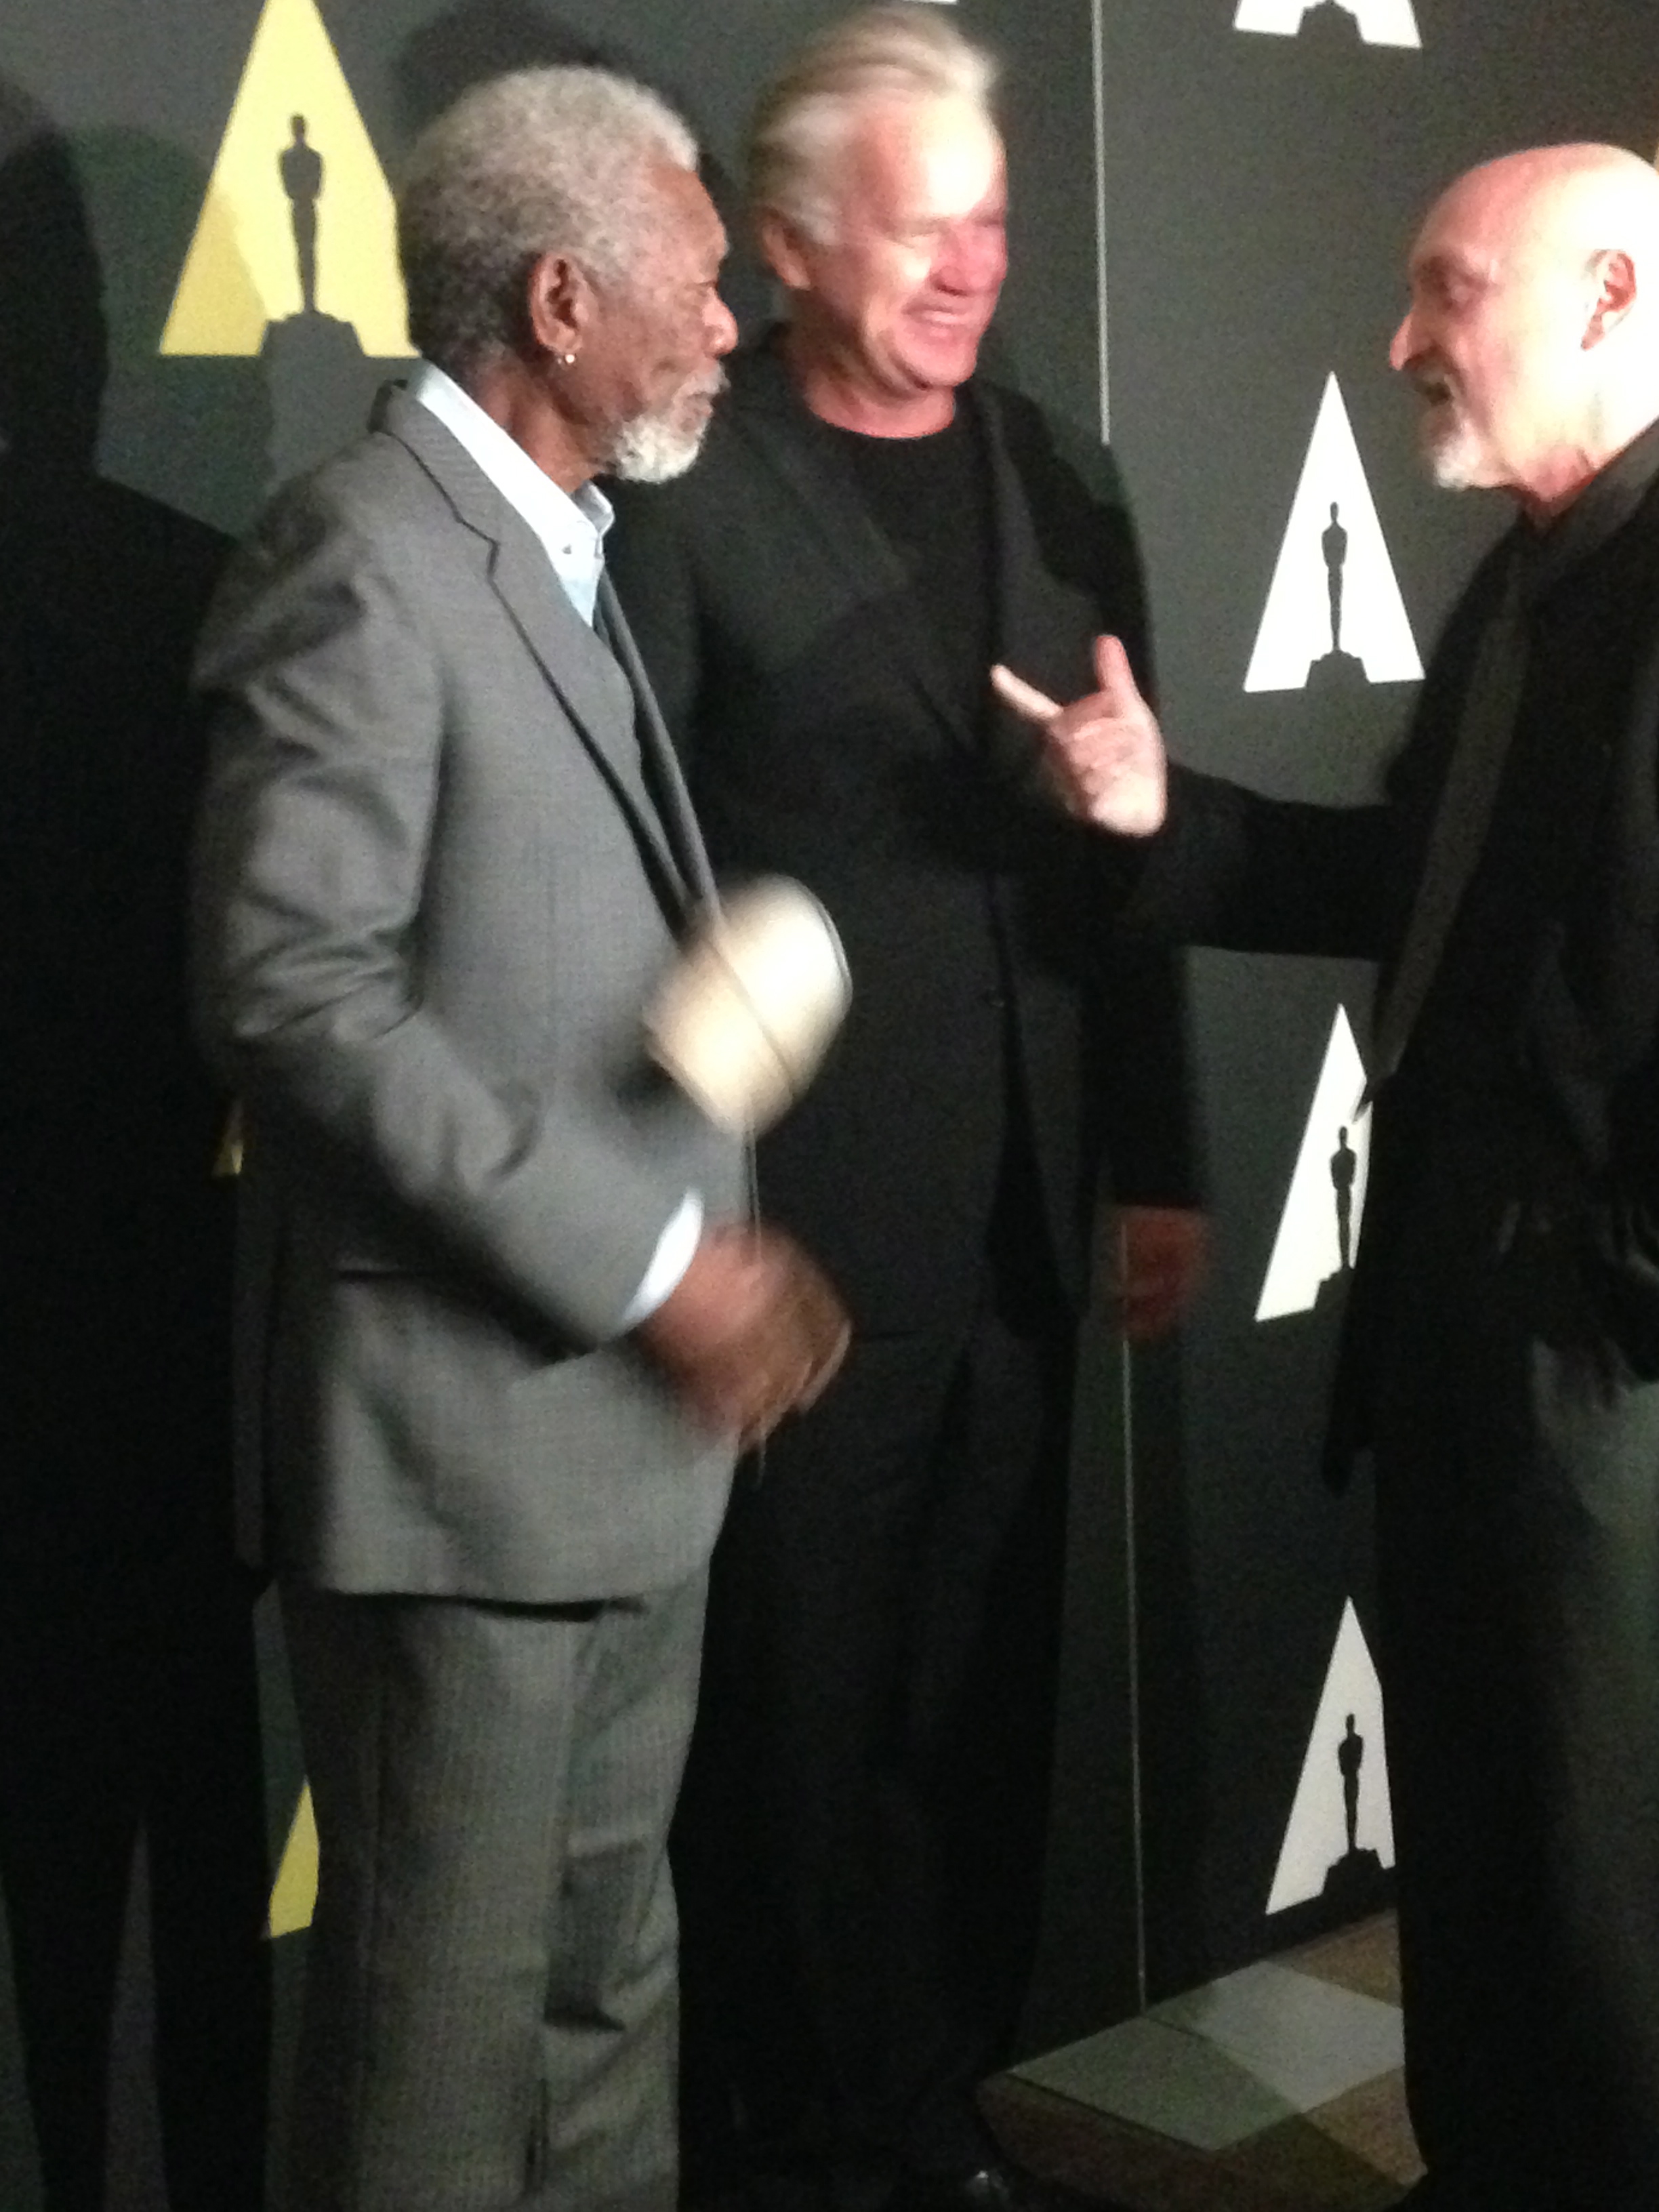 The Shawshank Redemption 20th Anniversary at The Academy of Motion Picture, Beverly Hills. Morgan Freeman, Frank Darabont and Tim Robbins. Nov 2014